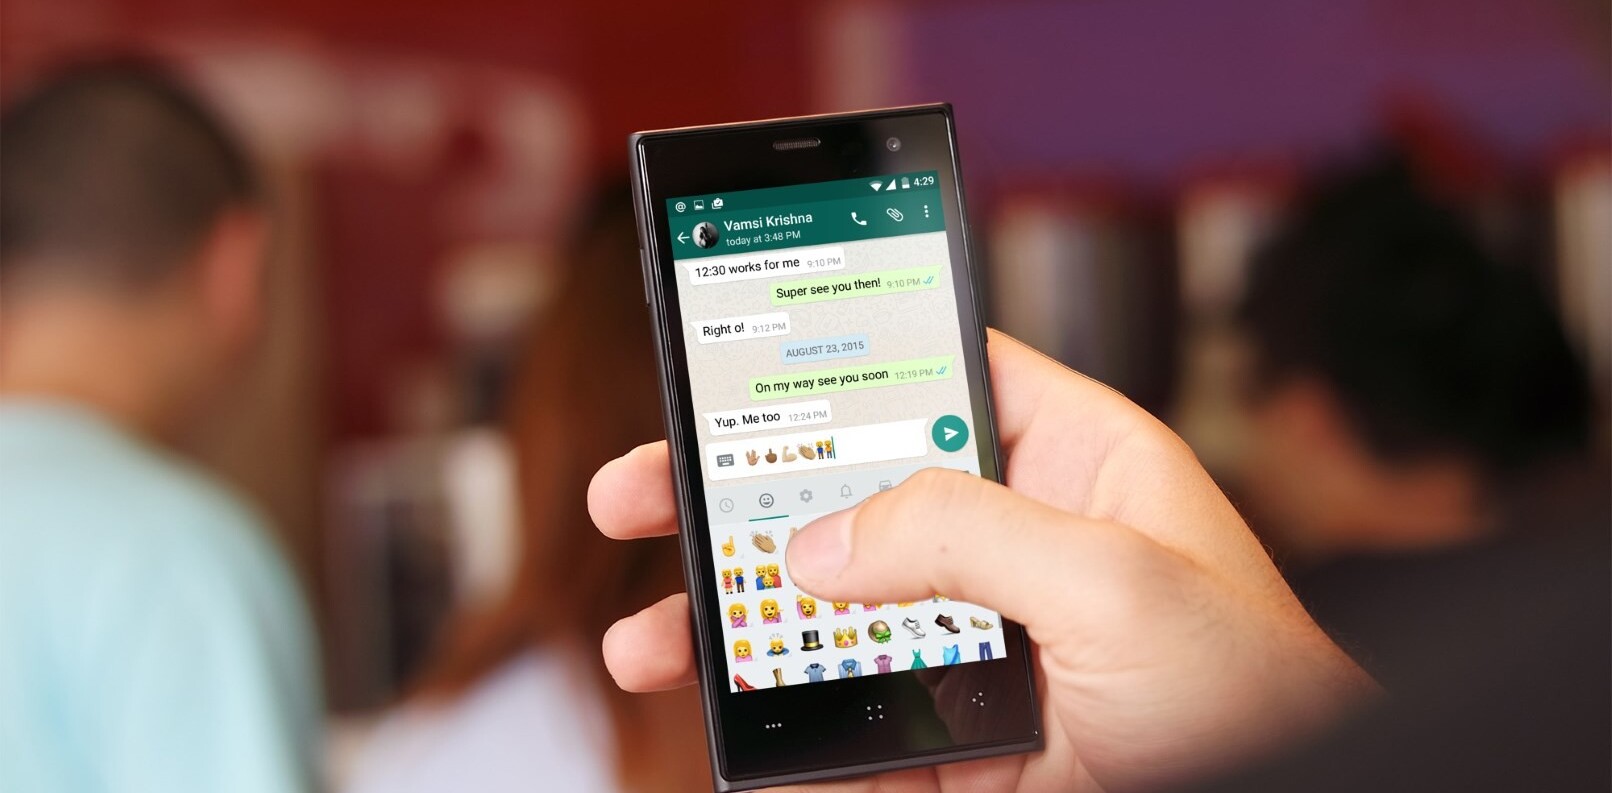 WhatsApp is dropping its annual 99 cent fee